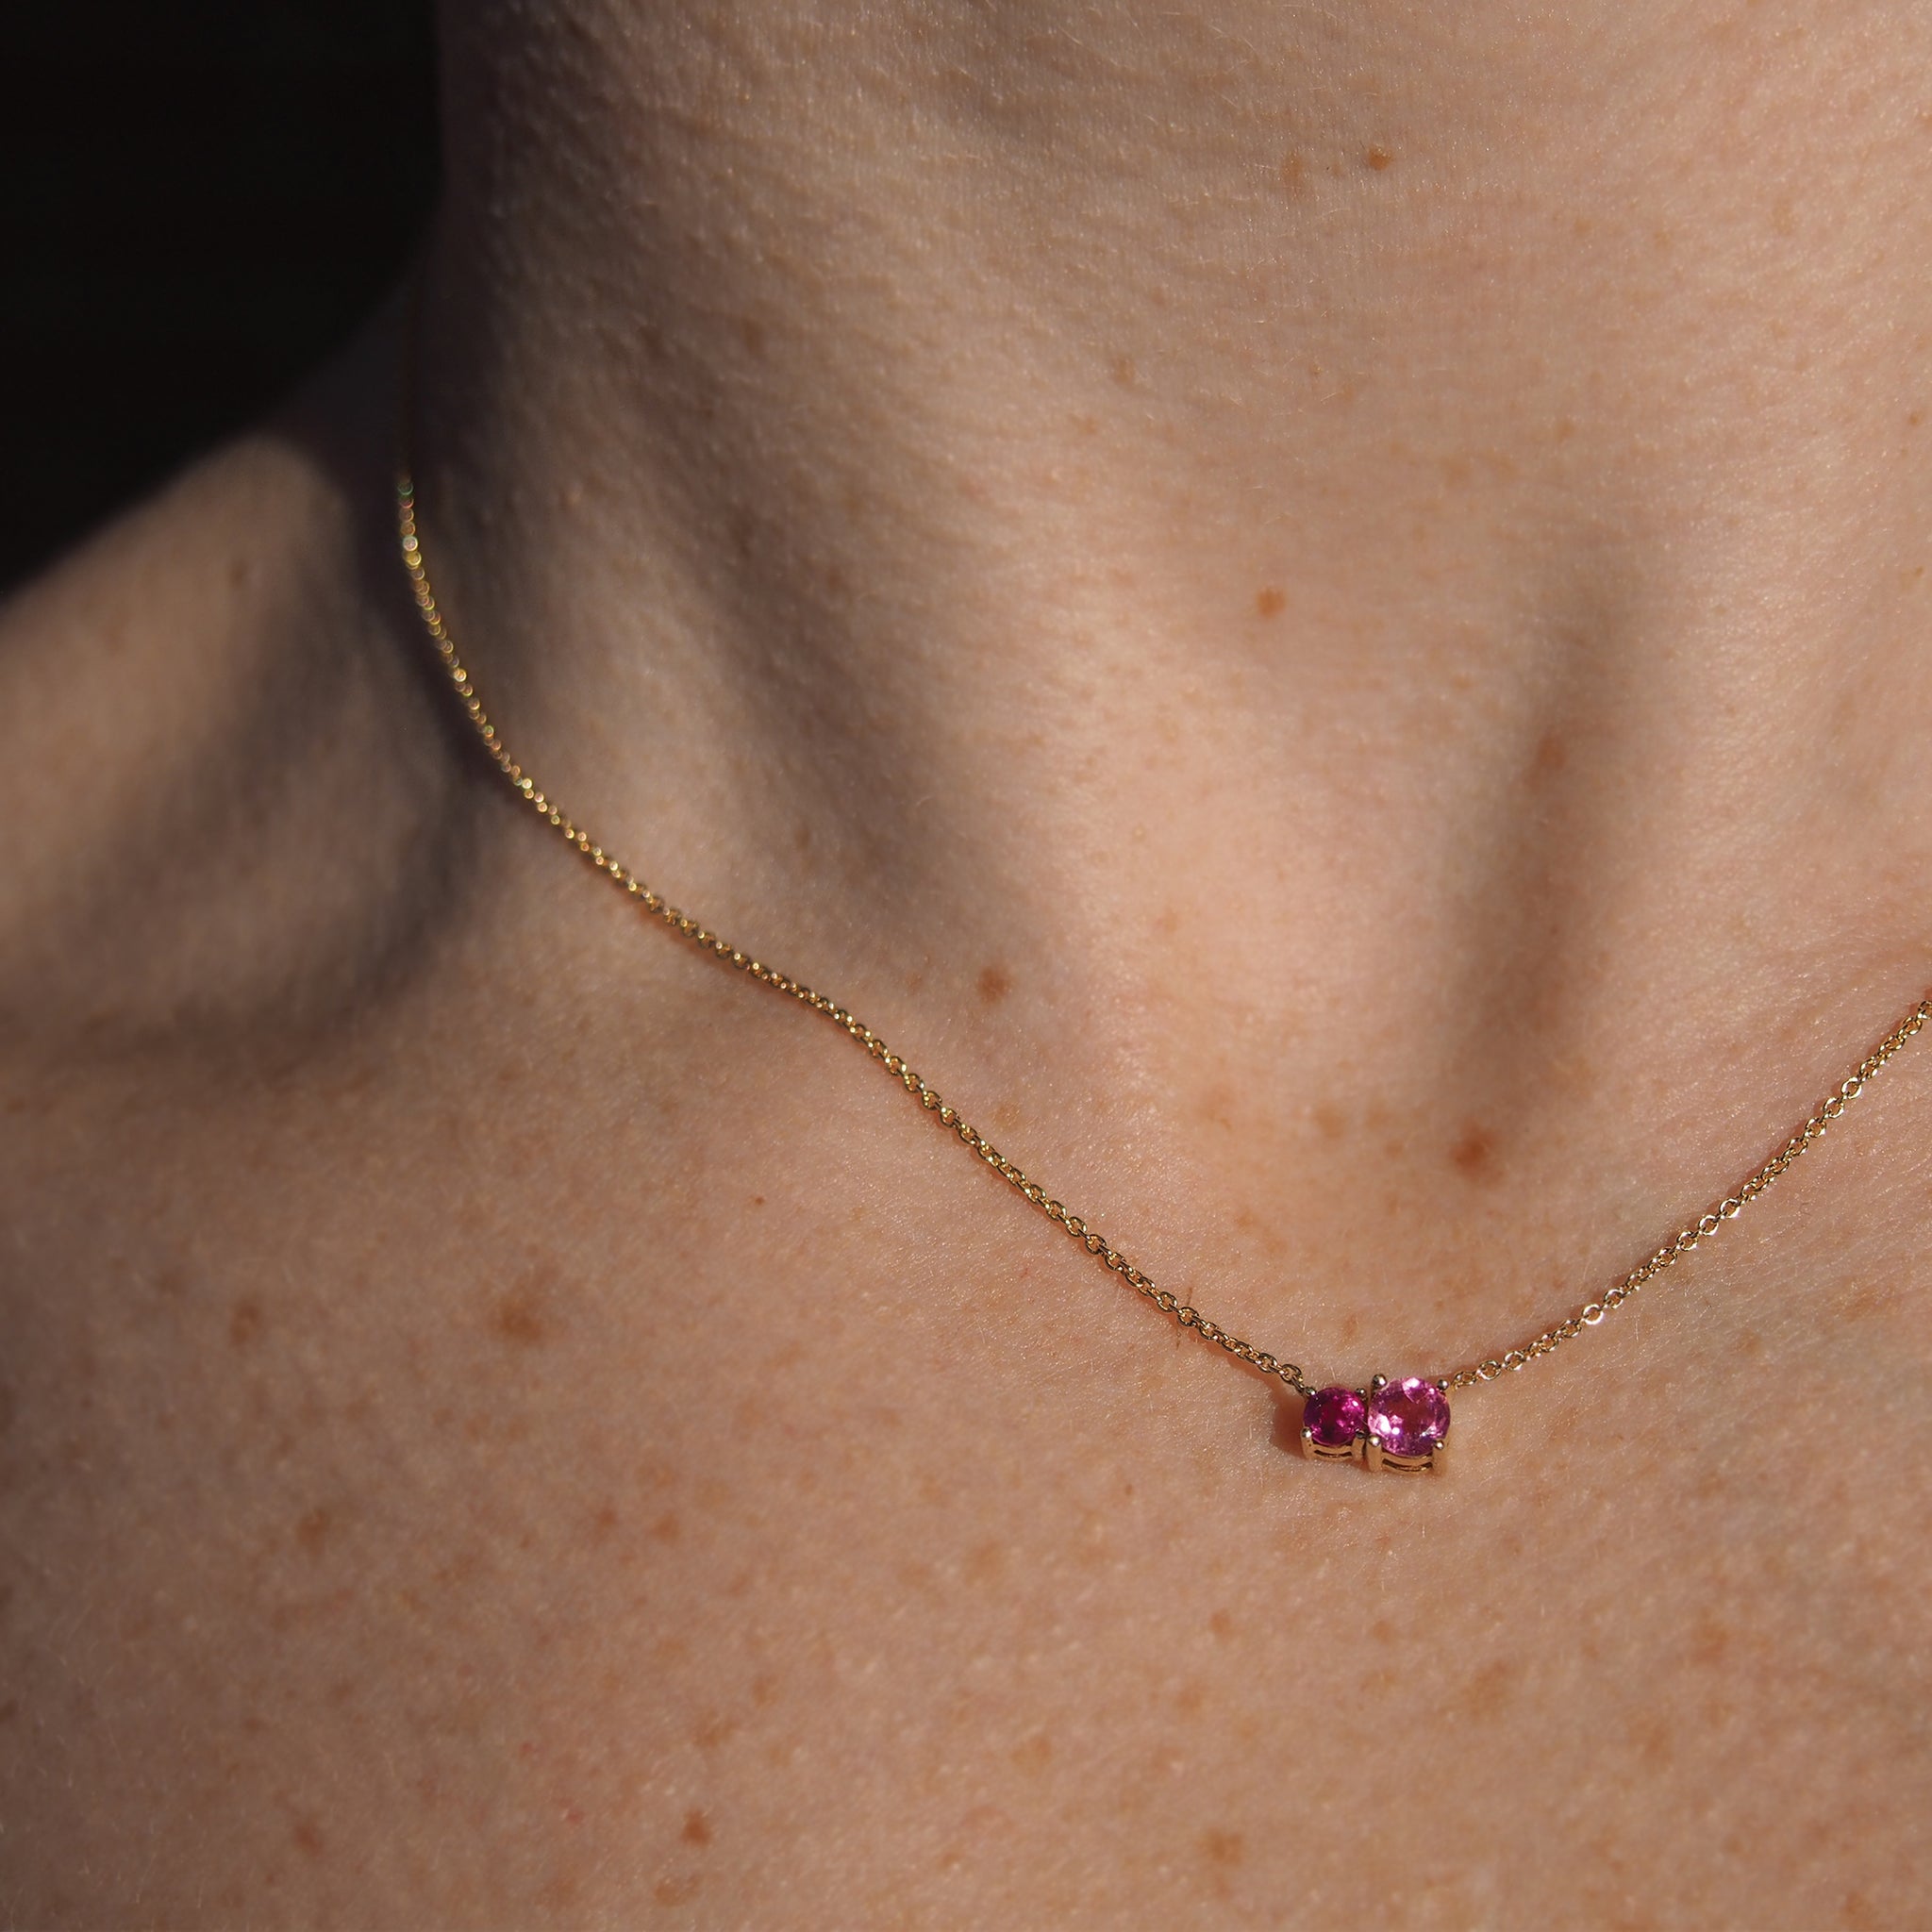 Perfectly aligned stack of Lico Jewelry's 2 stone necklace in solid 14k yellow gold, featuring genuine pink tourmaline and rubelite, and other necklaces. All made by Lico Jewelry in Montreal.